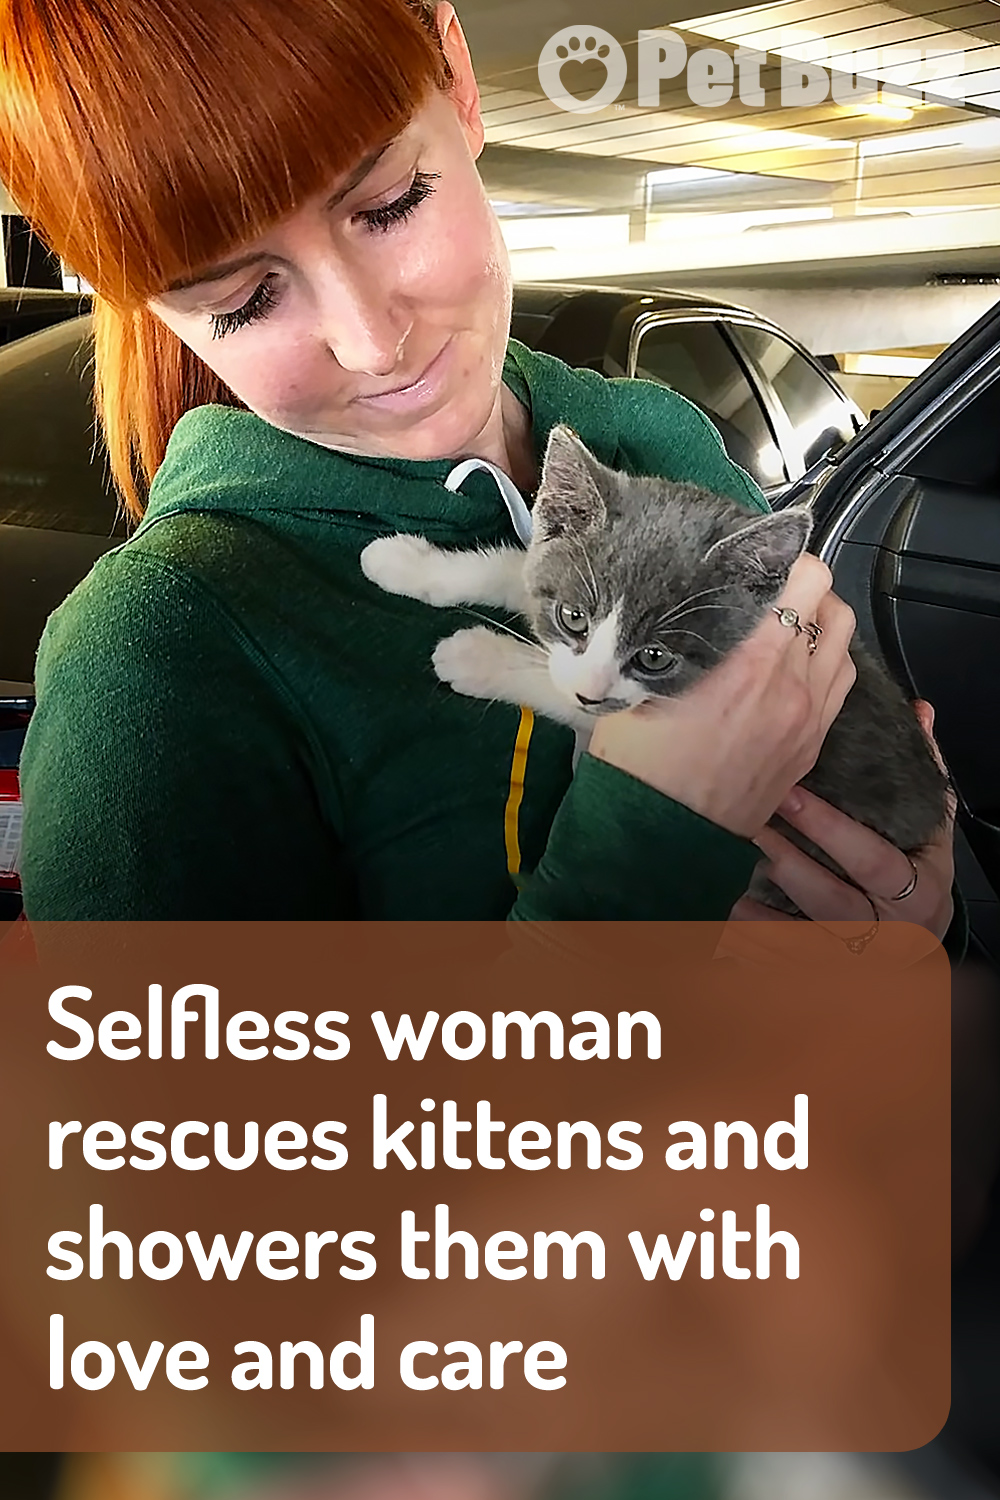 Selfless woman rescues kittens and showers them with love and care